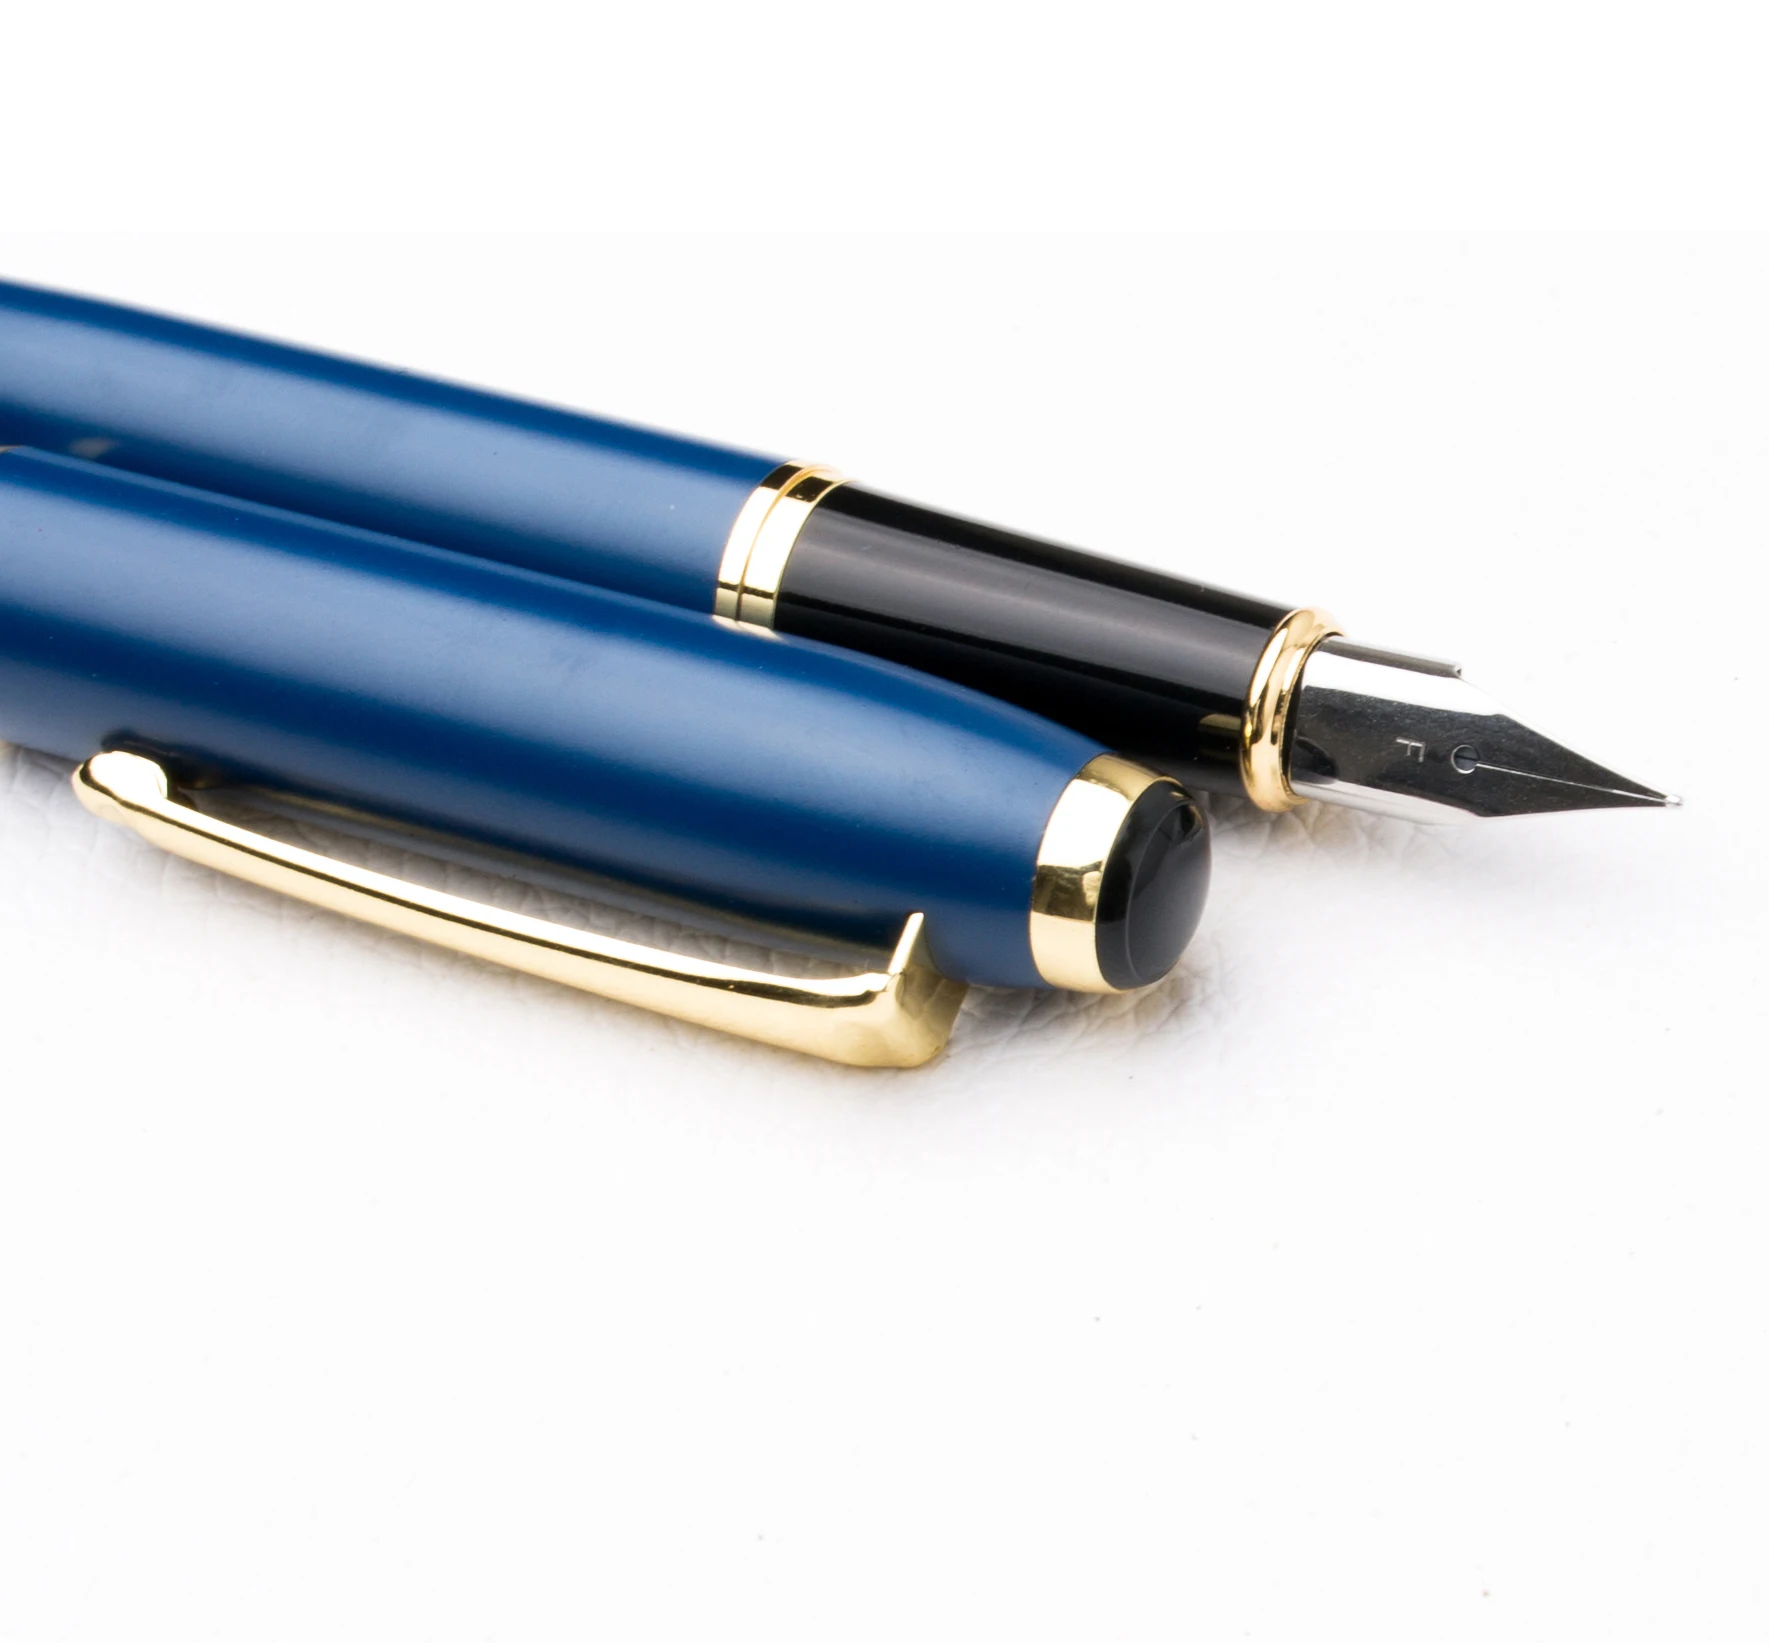 Specialized Made Parker Fountain Pen With German Ink - Buy German ...